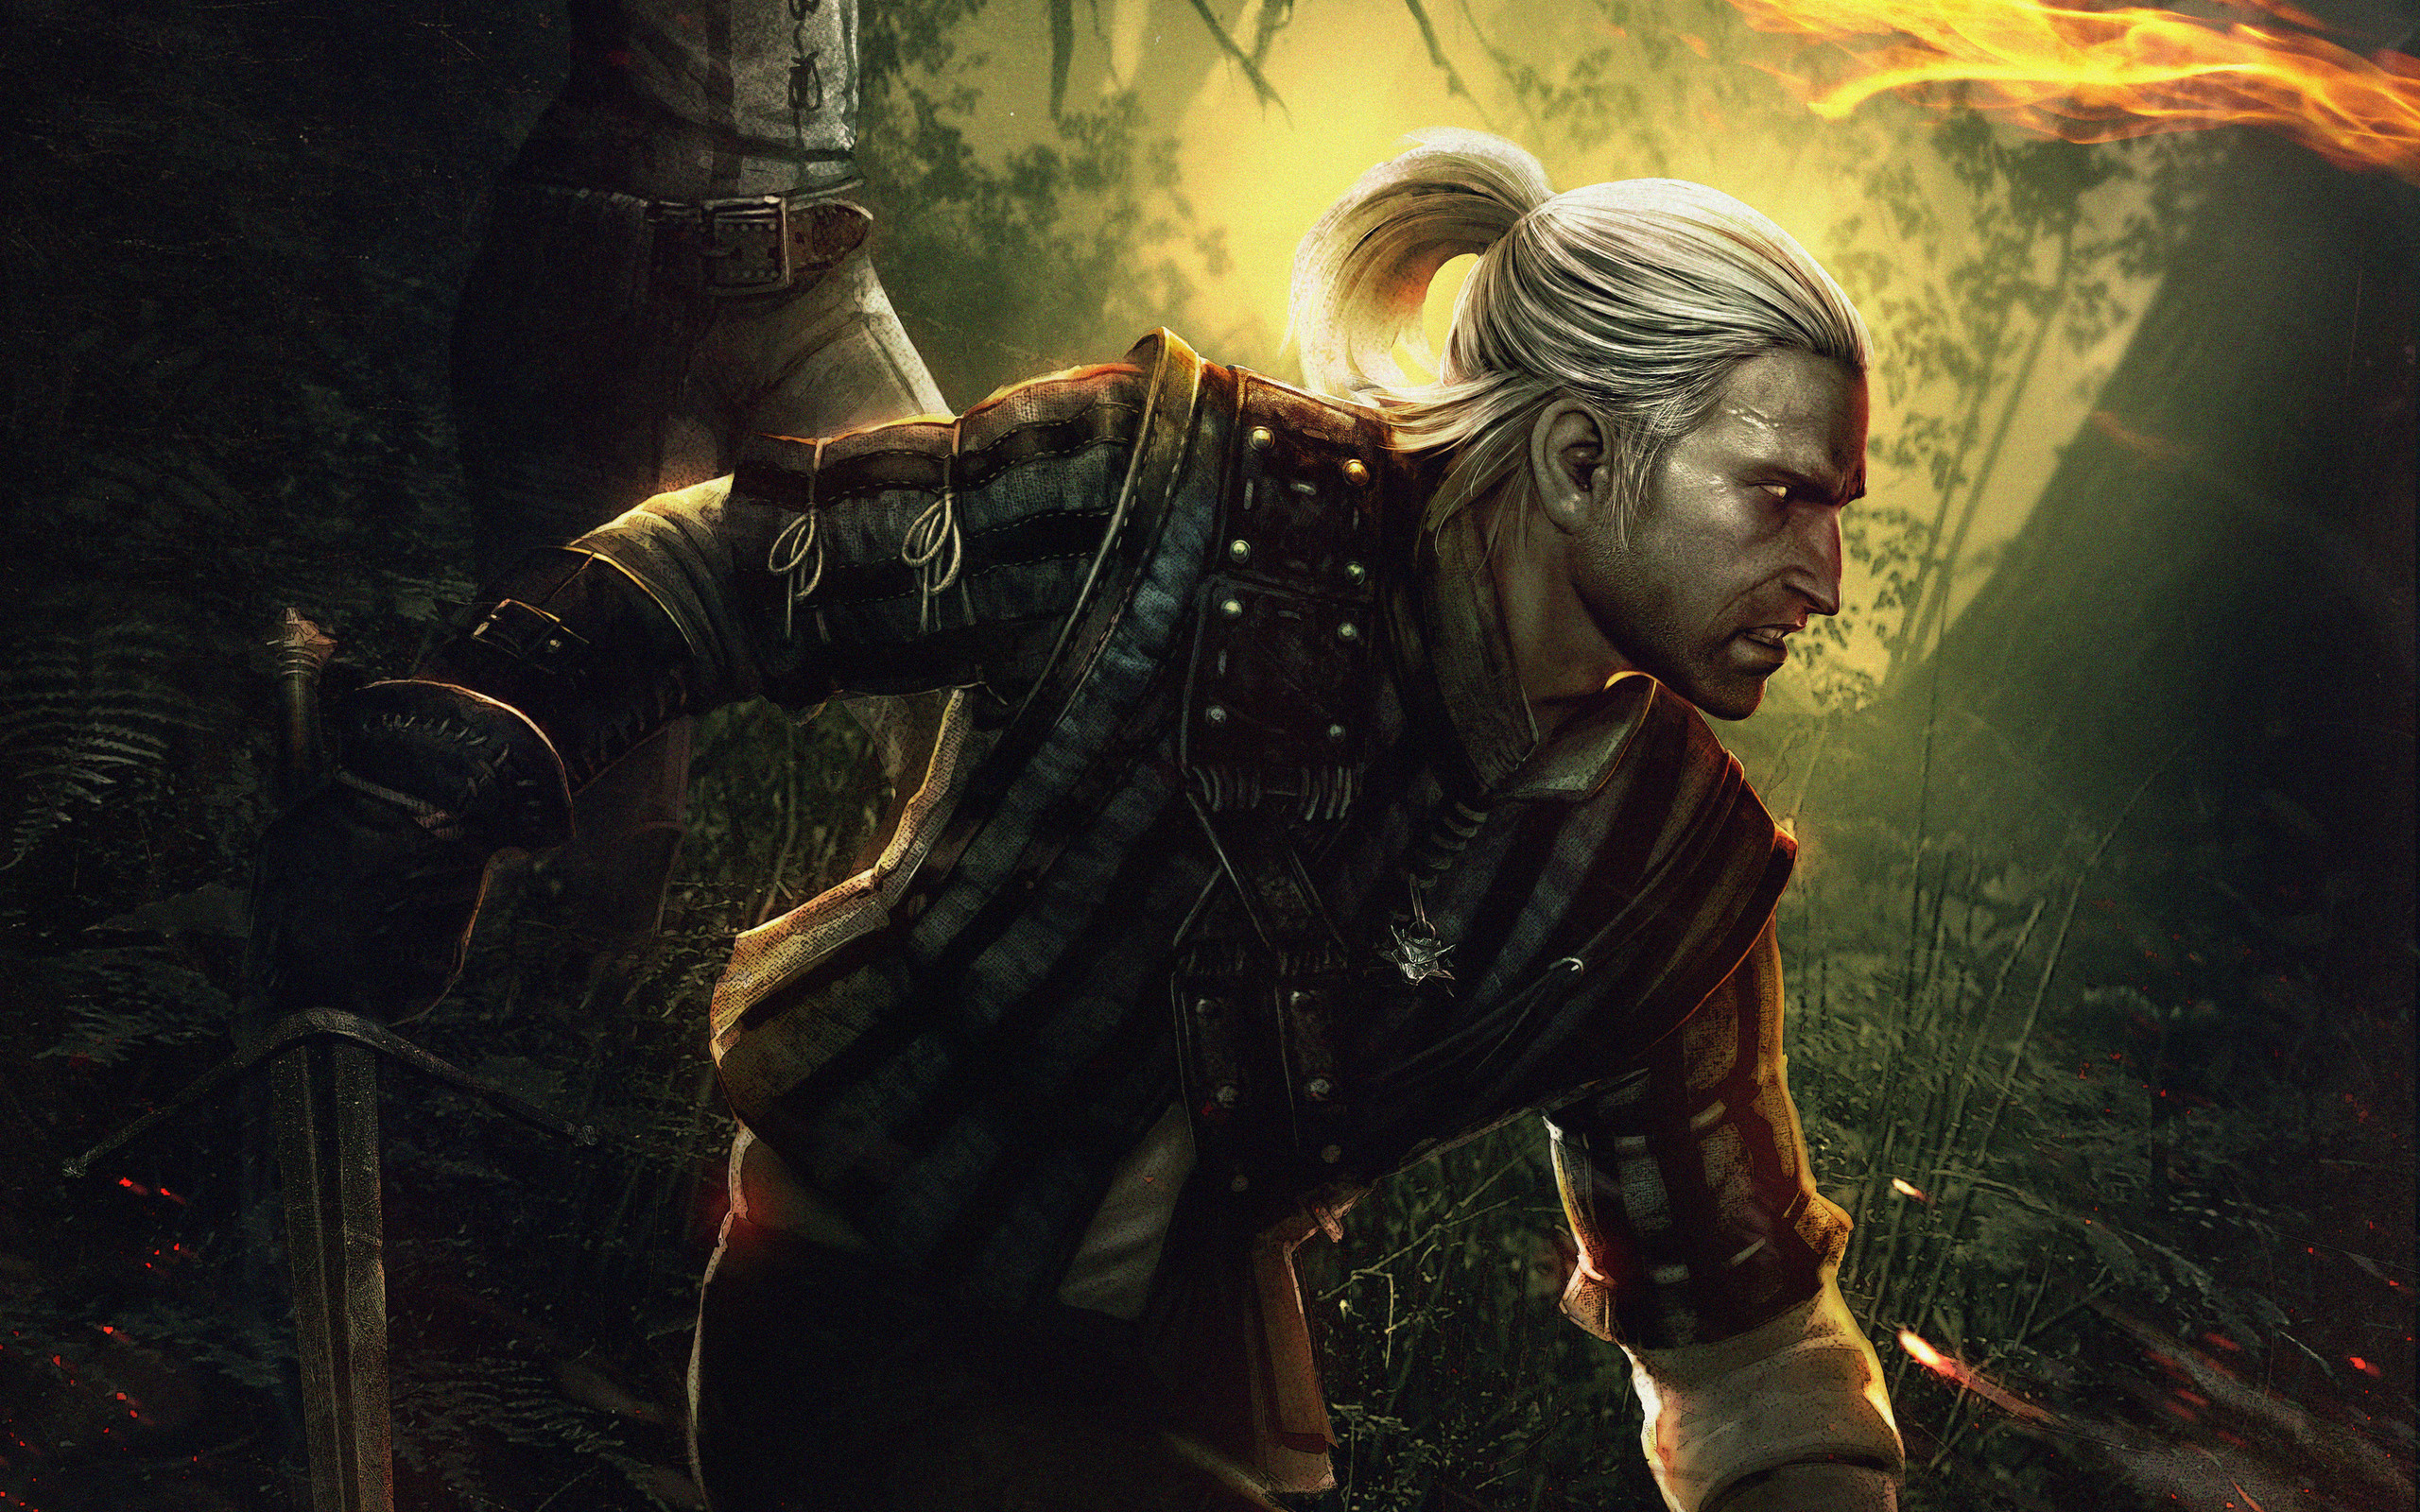 Video Game The Witcher 2: Assassins Of Kings HD Wallpaper